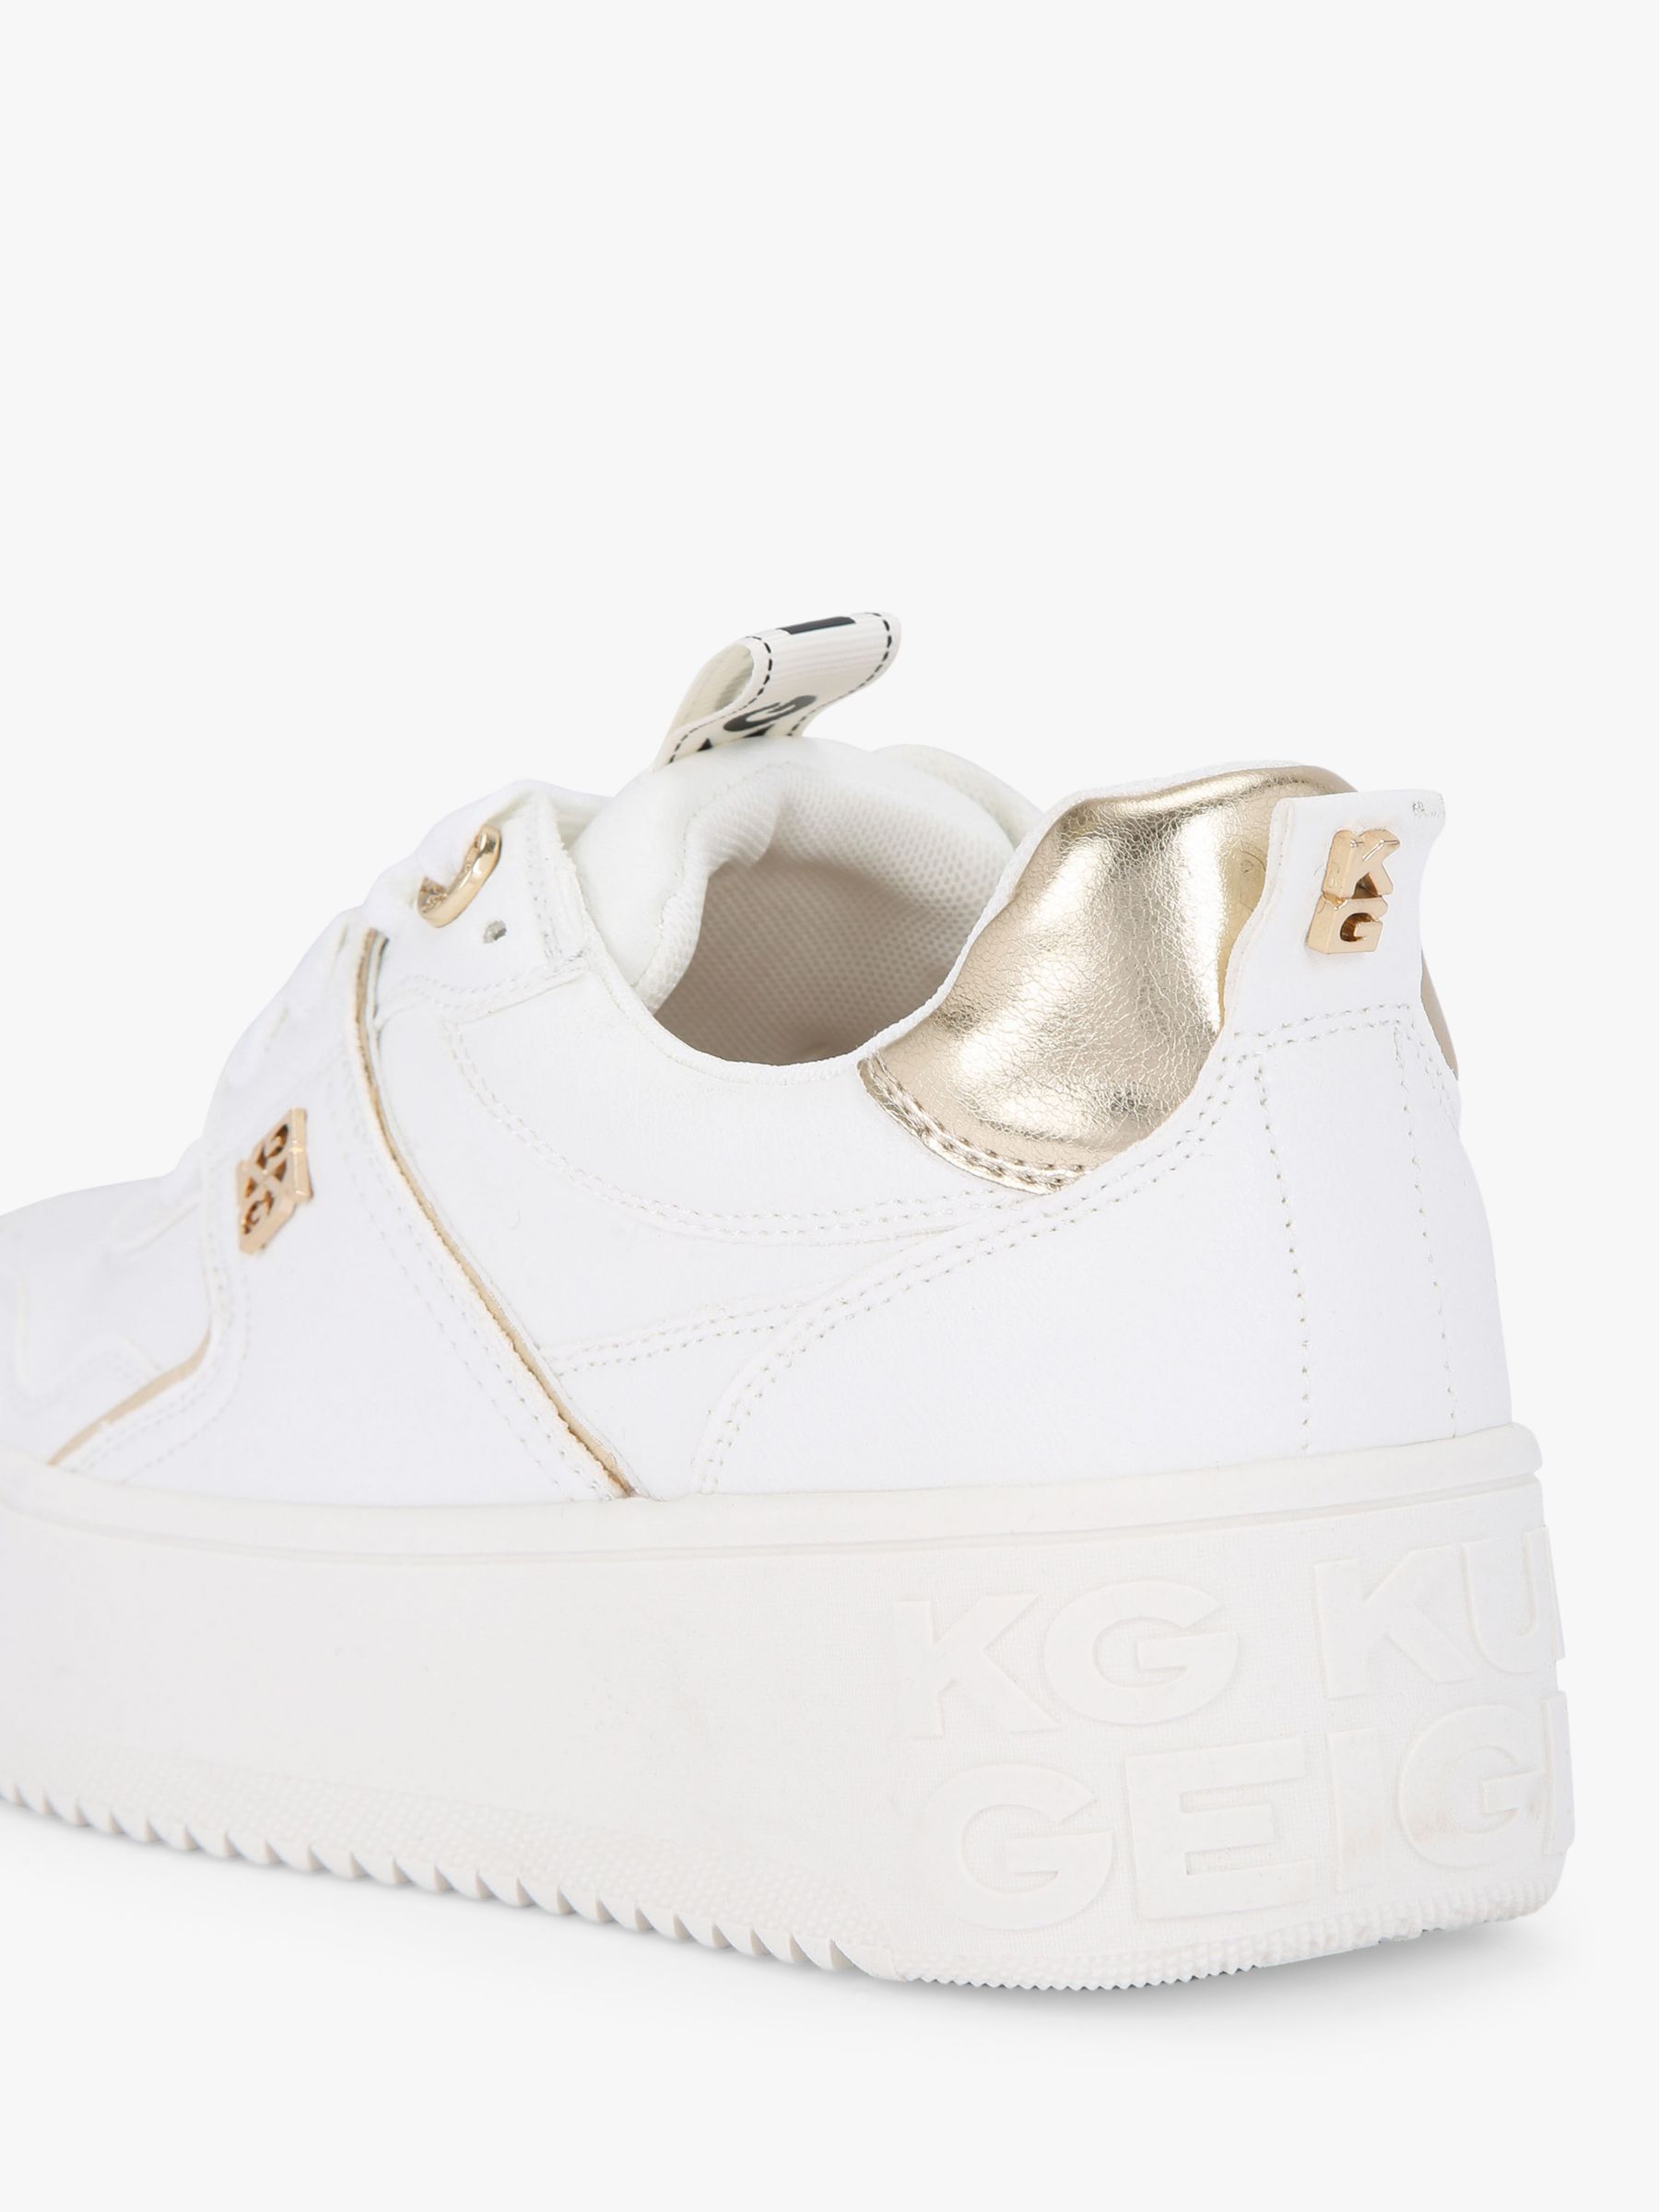 KG Kurt Geiger Lyra Lace Up Trainers, White/gold at John Lewis & Partners